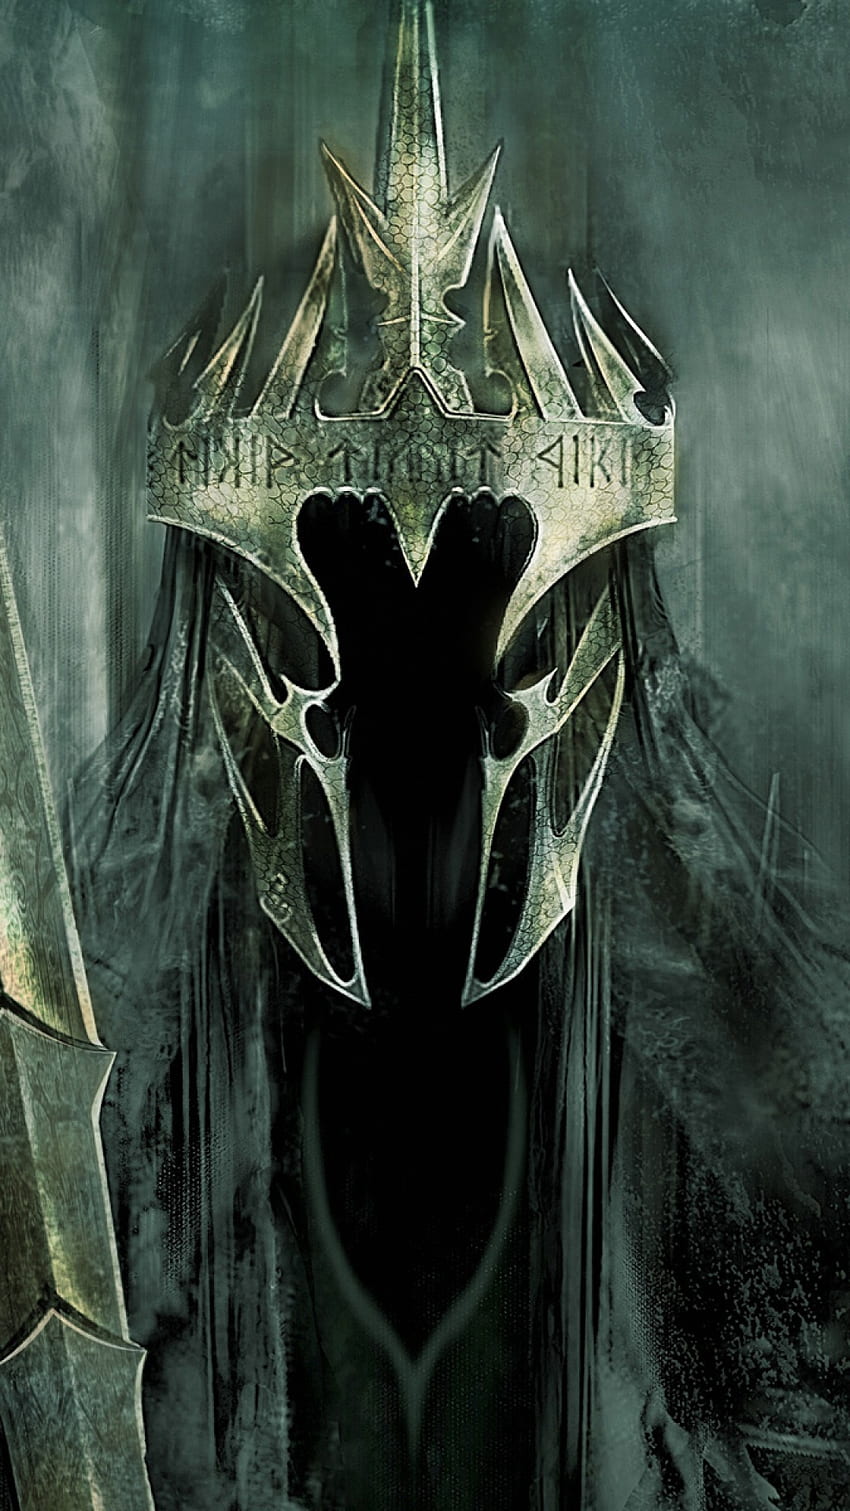 Nazgul Lord of the Rings - Best HTC One M9 HD phone wallpaper